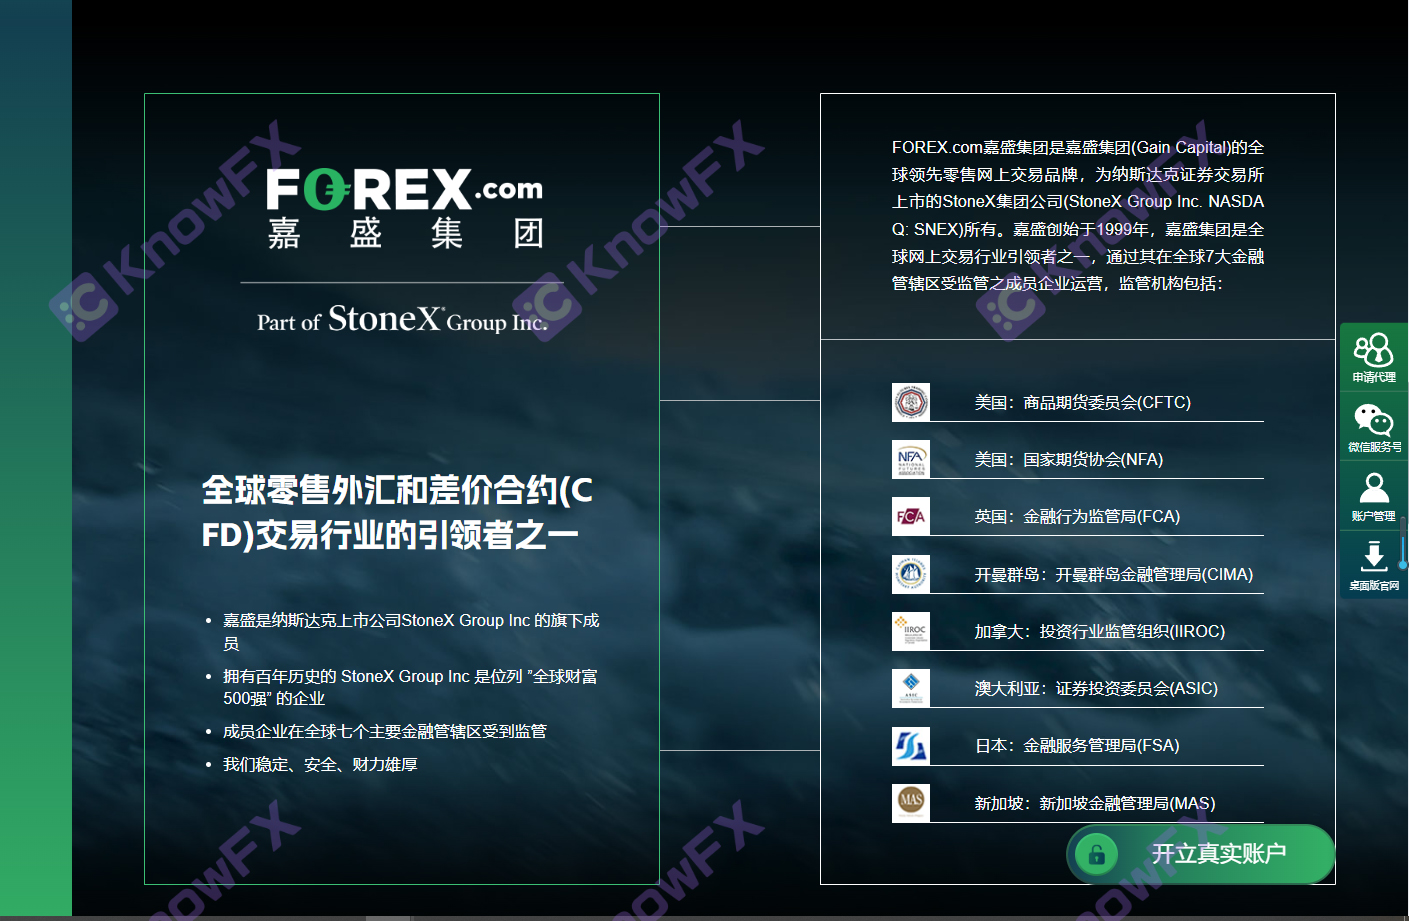 Foreign promotion of foreign exchange brokers FOREX!Regulatory issues are frequent!There is a problem with the server!Intersection-第6张图片-要懂汇圈网